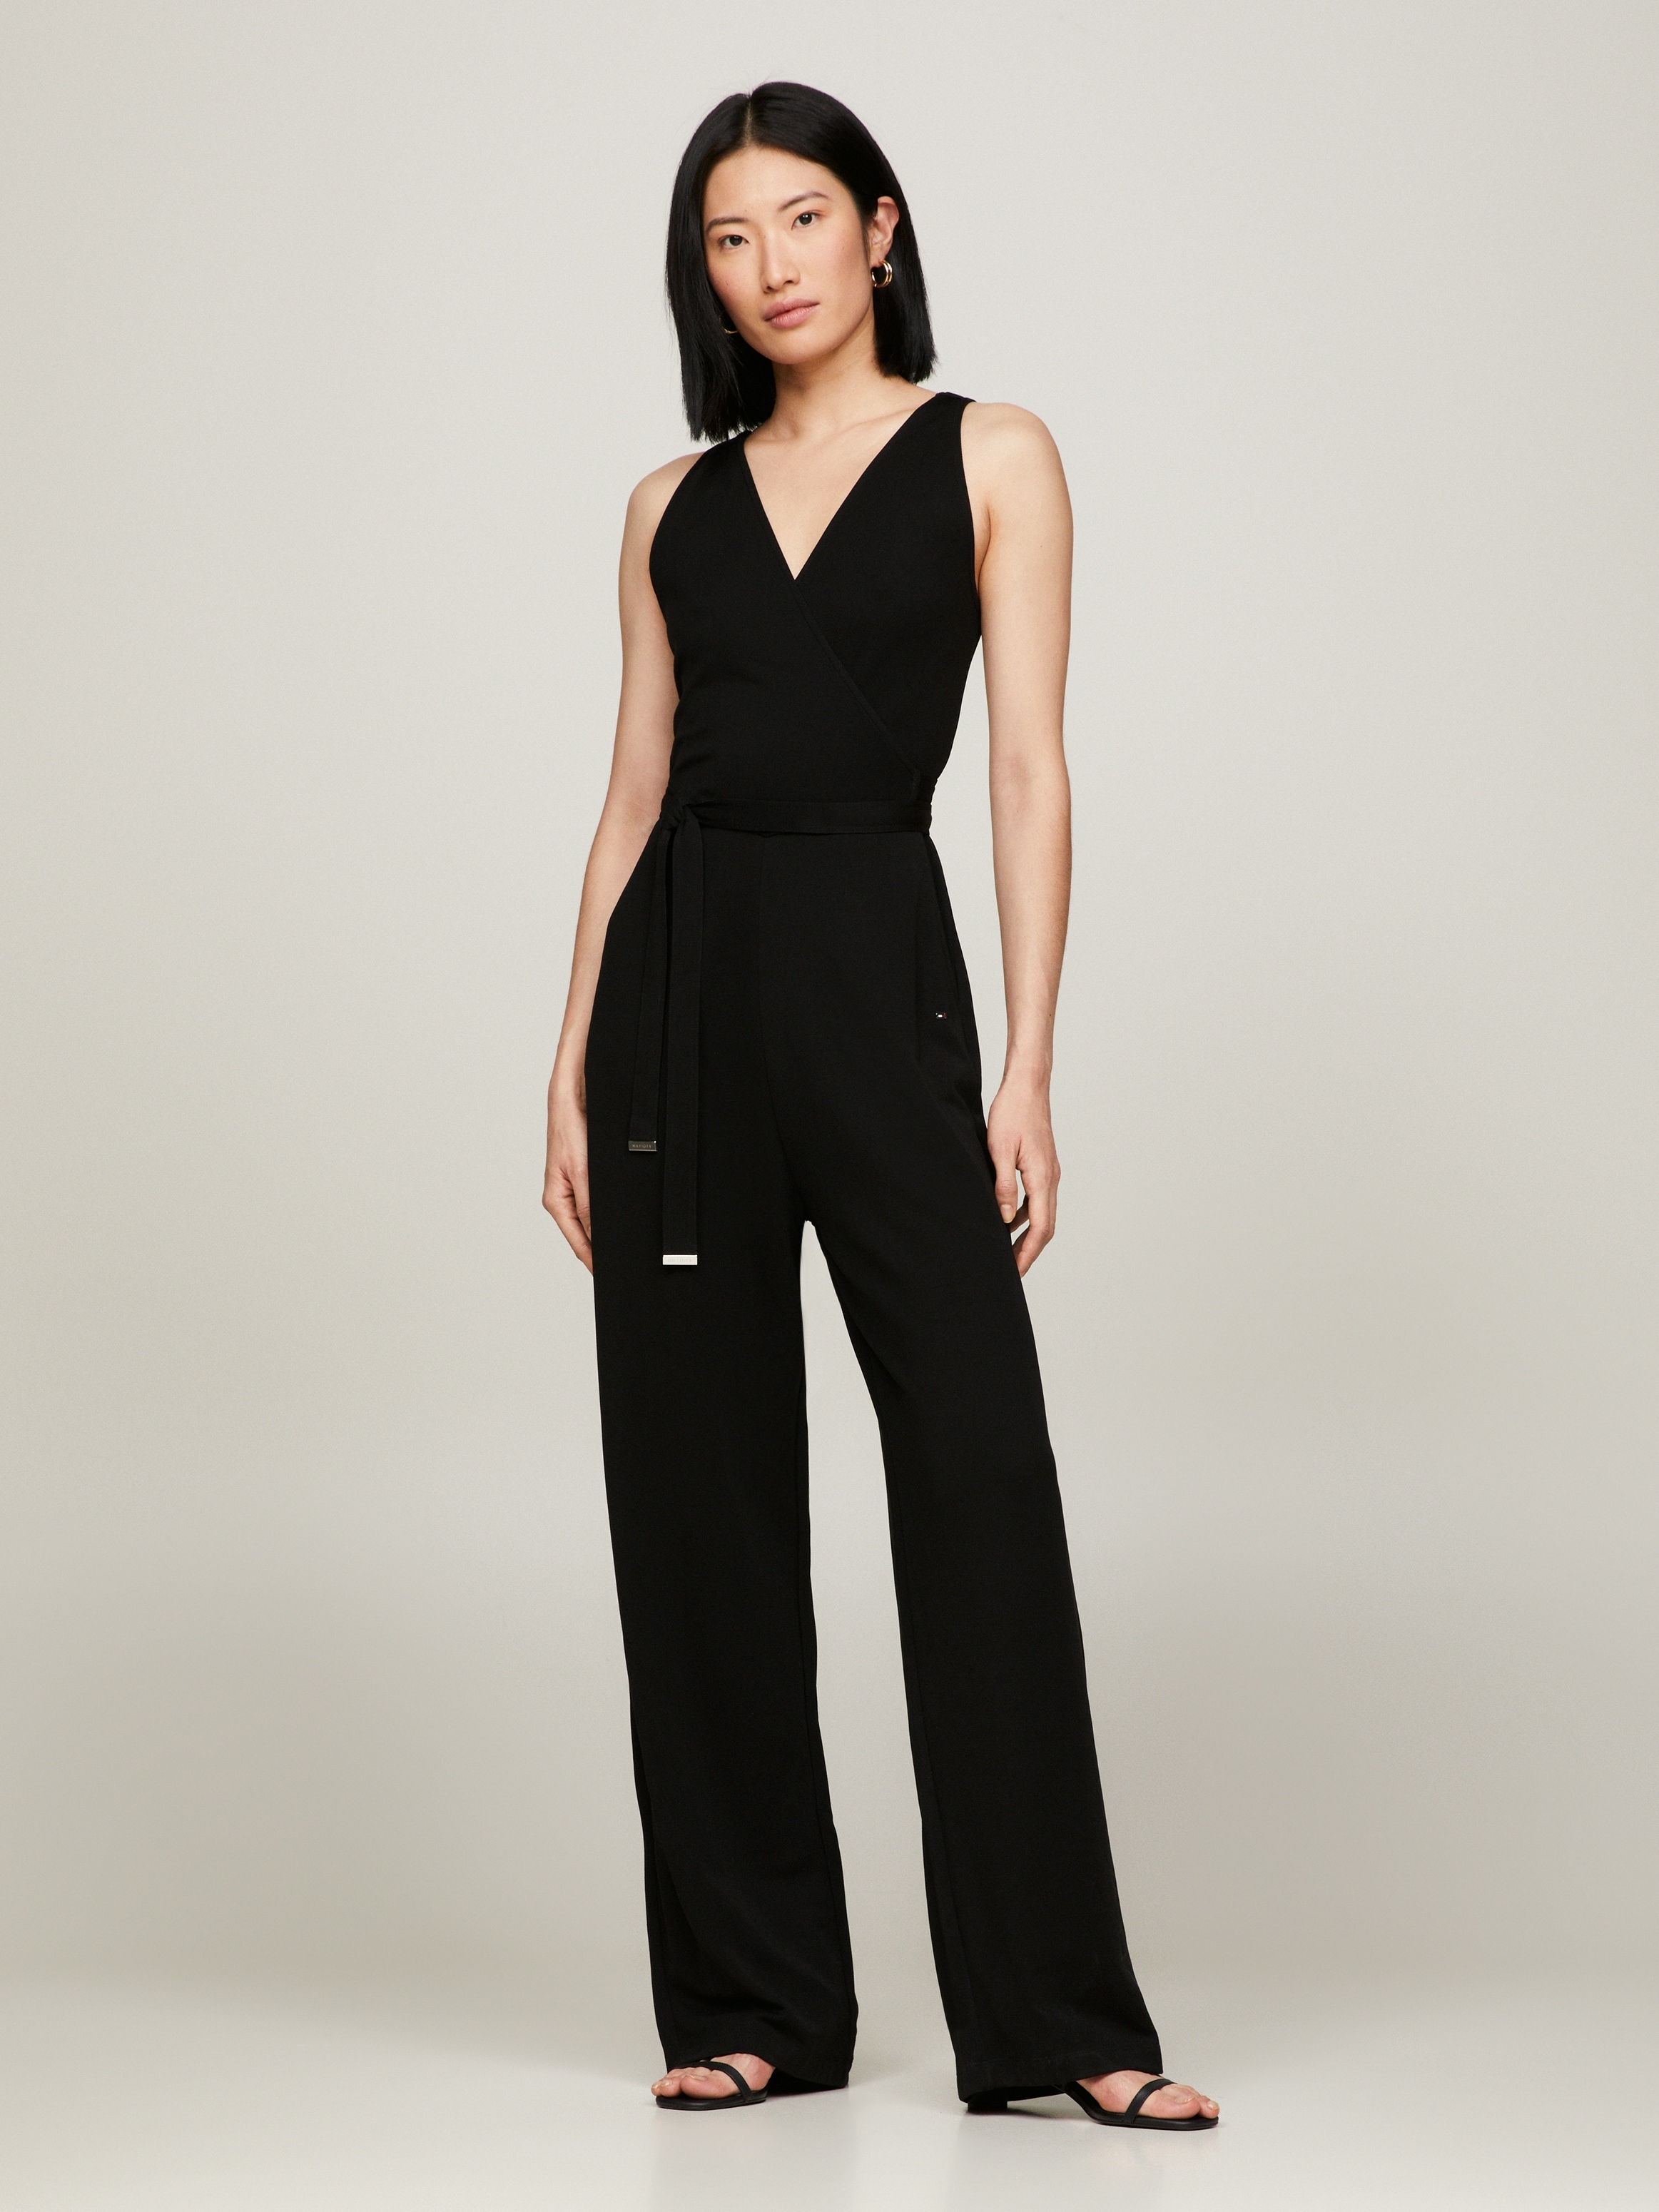 Tommy Hilfiger Culotte-Overall »WRAP DETAIL JUMPSUIT SLEEVELESS«, mit Bindeband